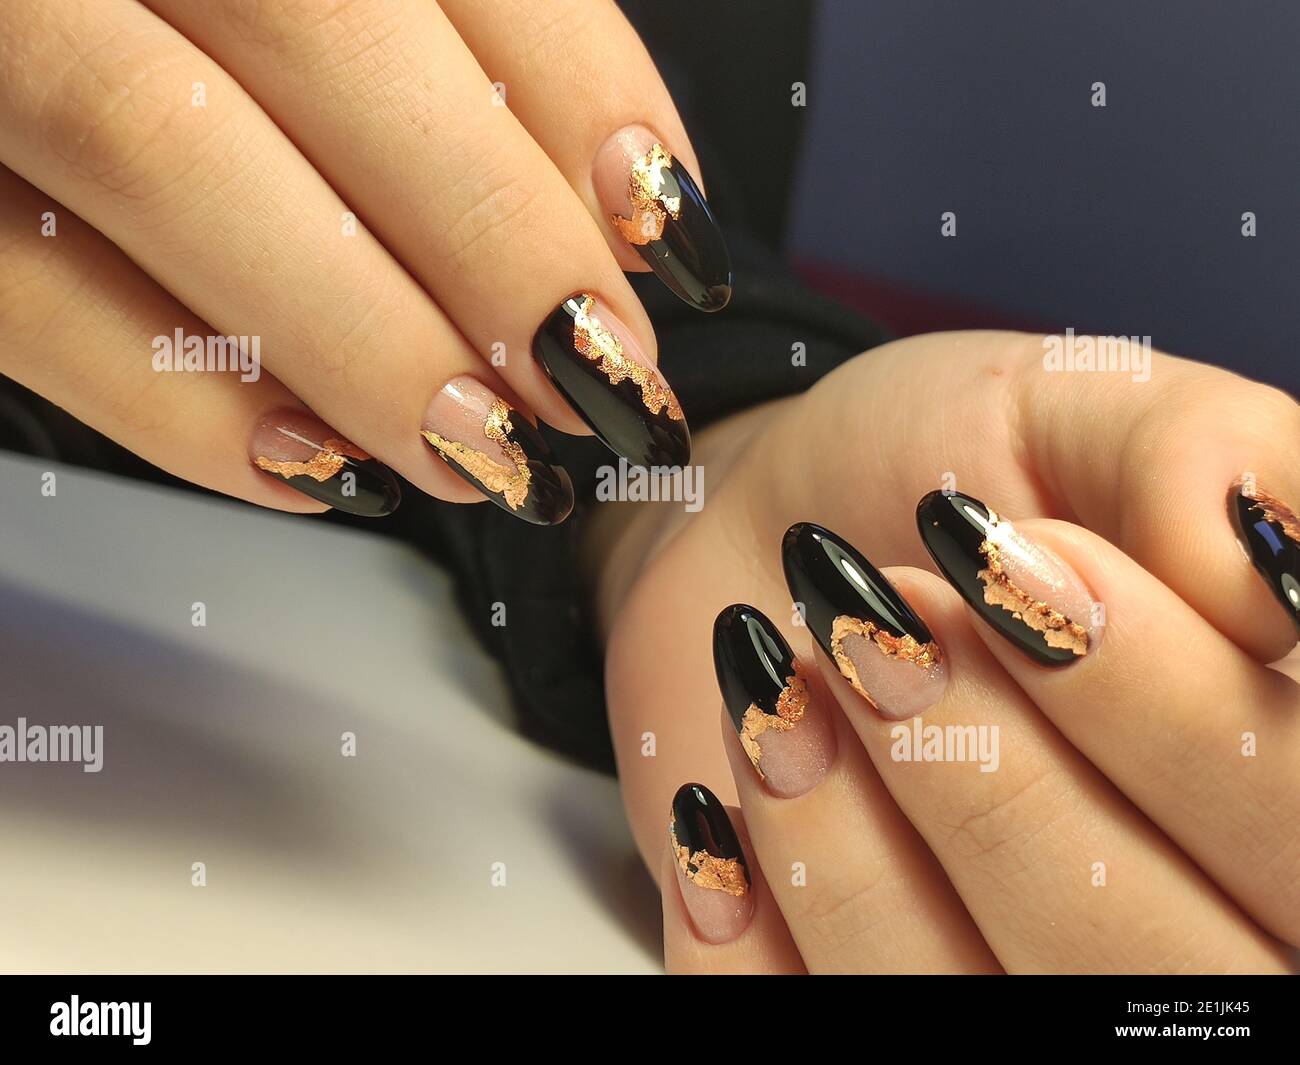 3,248 Crystal Nail Design Royalty-Free Photos and Stock Images |  Shutterstock